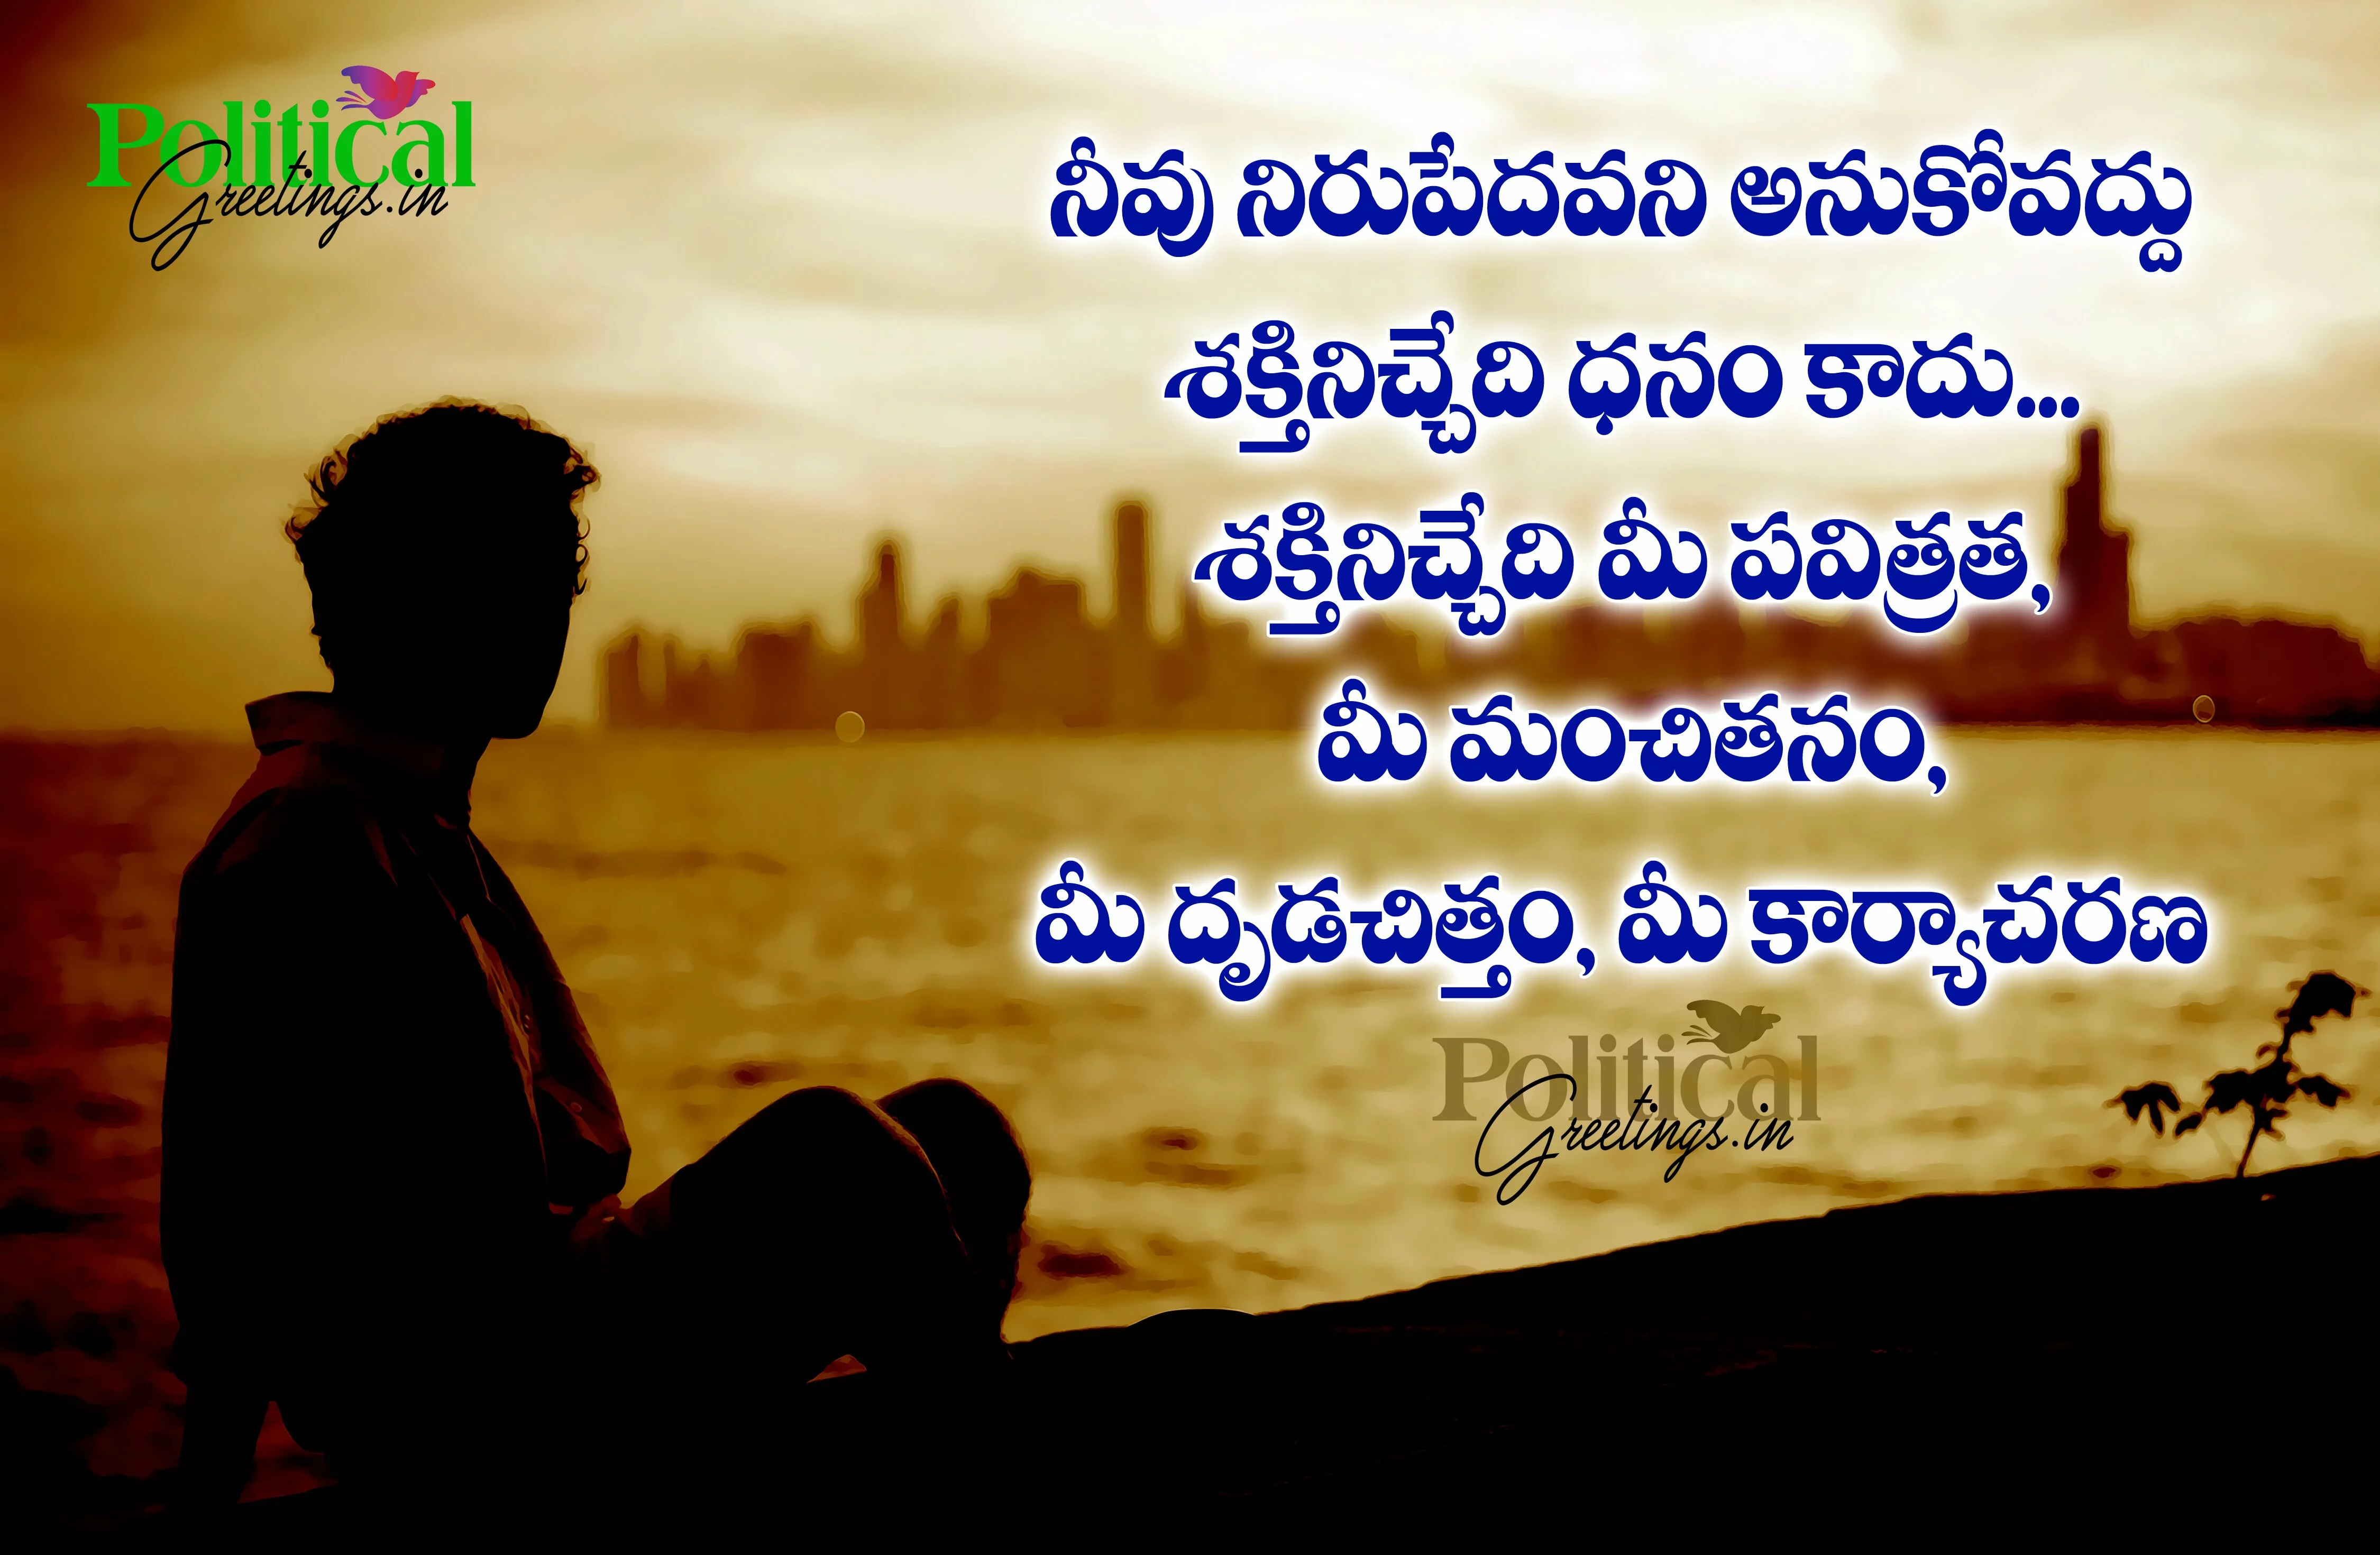 inpiring-telugu-quotes-and-greetings-about-life-for-facebook